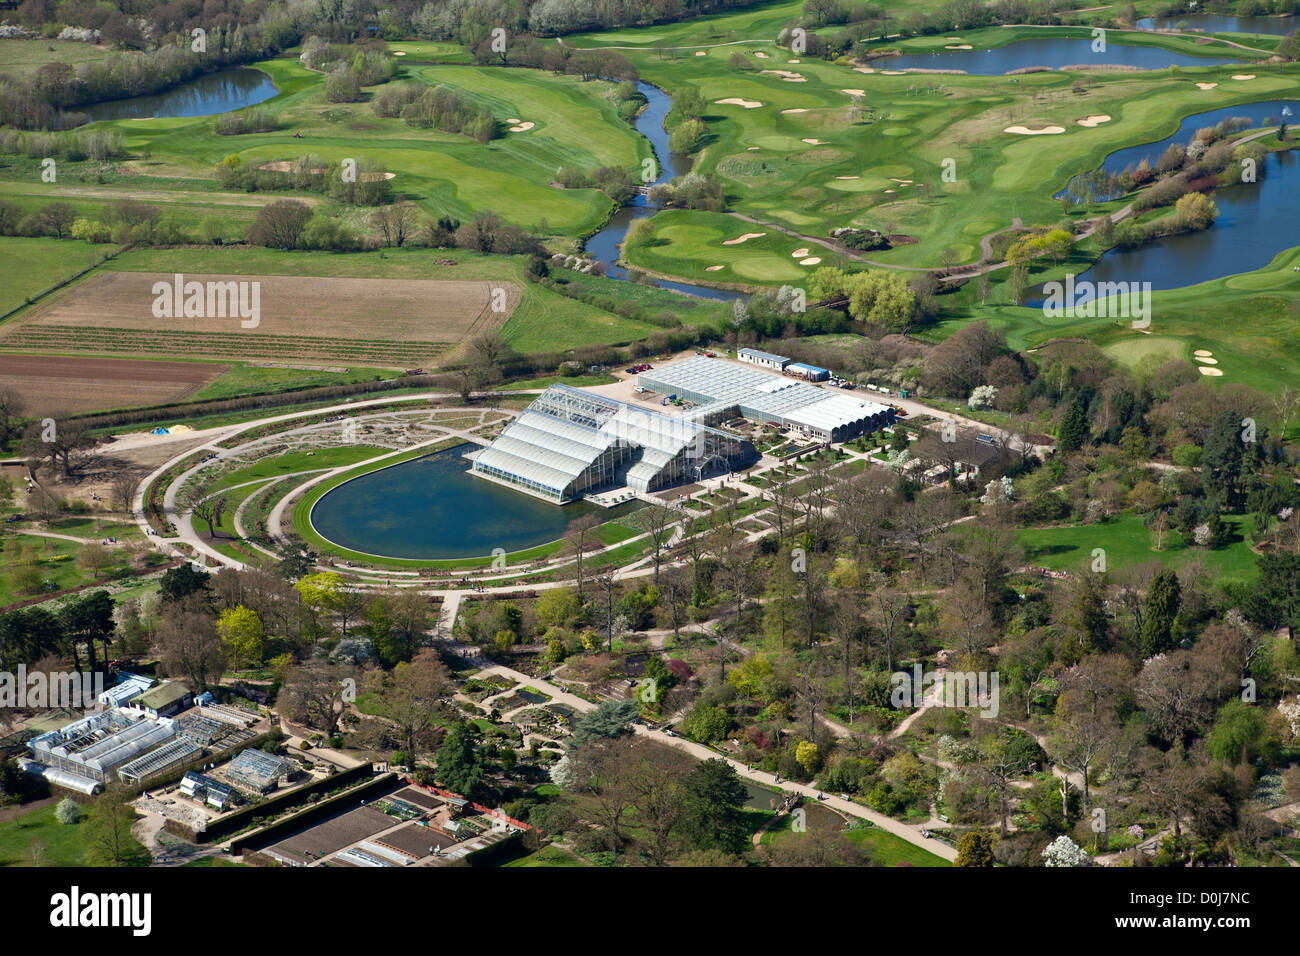 An aerial view of The Glasshouse which is the centrepiece of the Royal Horticultural Gardens at Wisley. Stock Photo